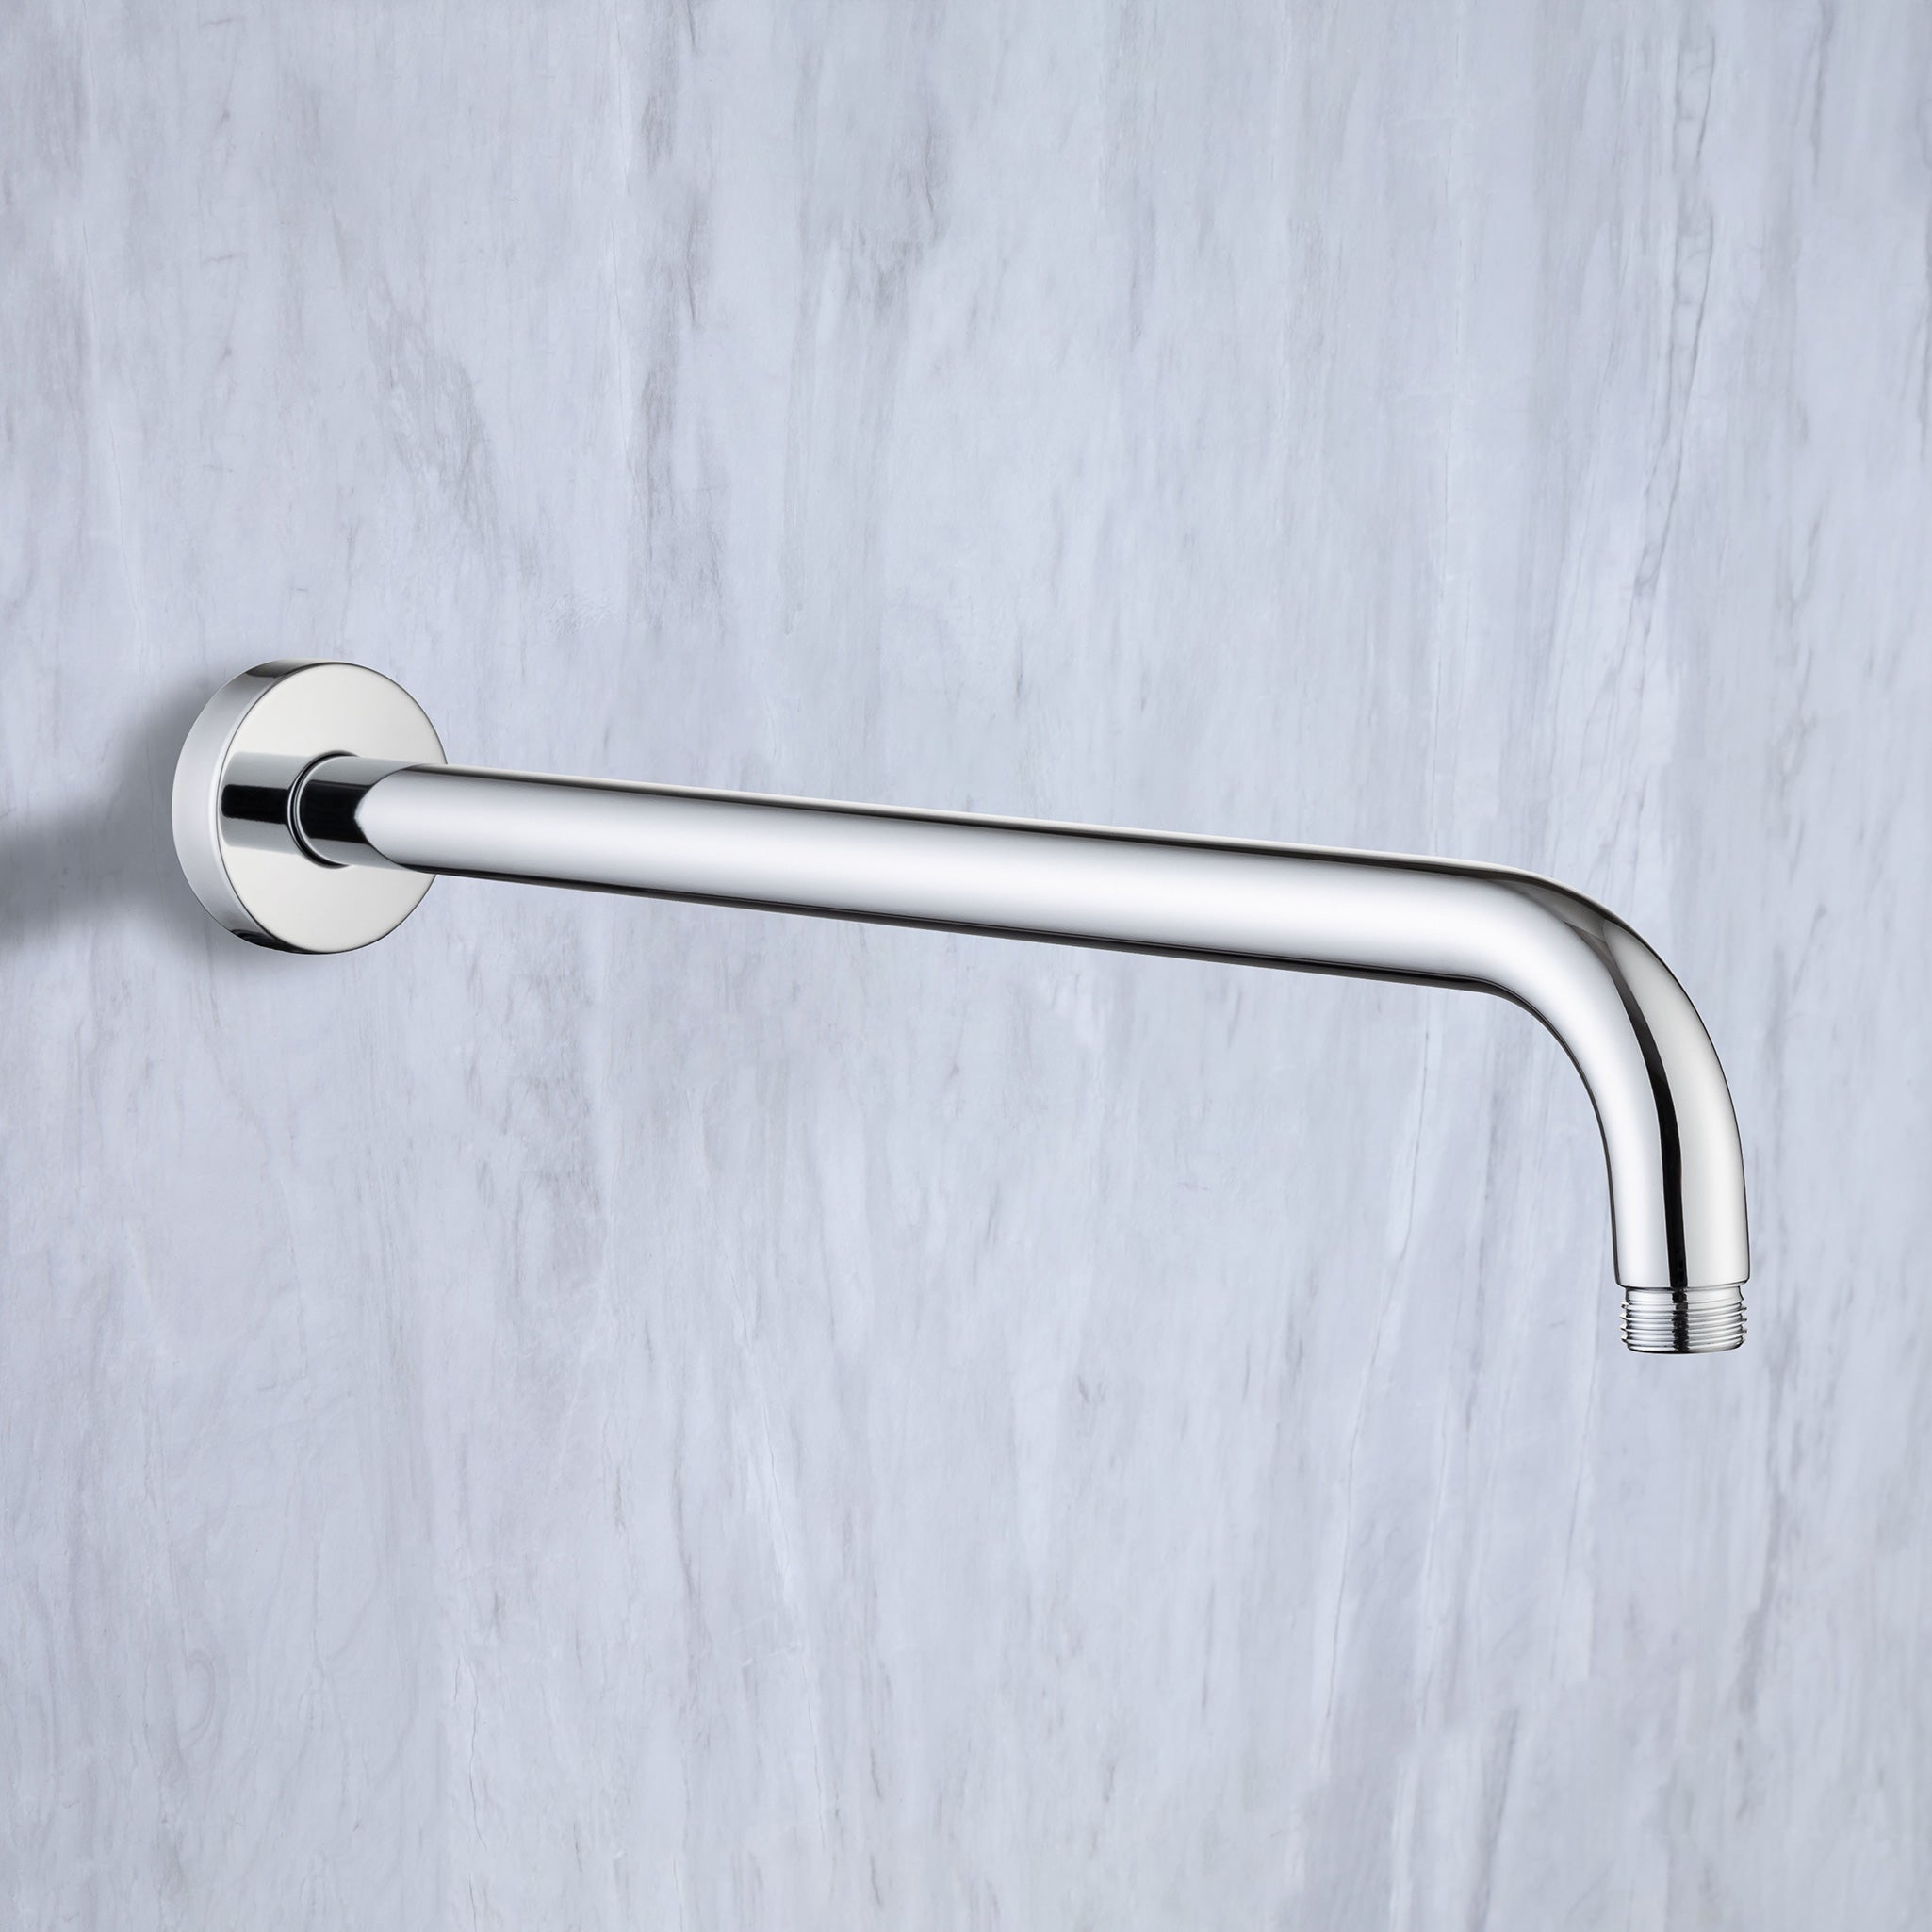 16'' Round Wall Mount Shower Arm With Flange L2-16